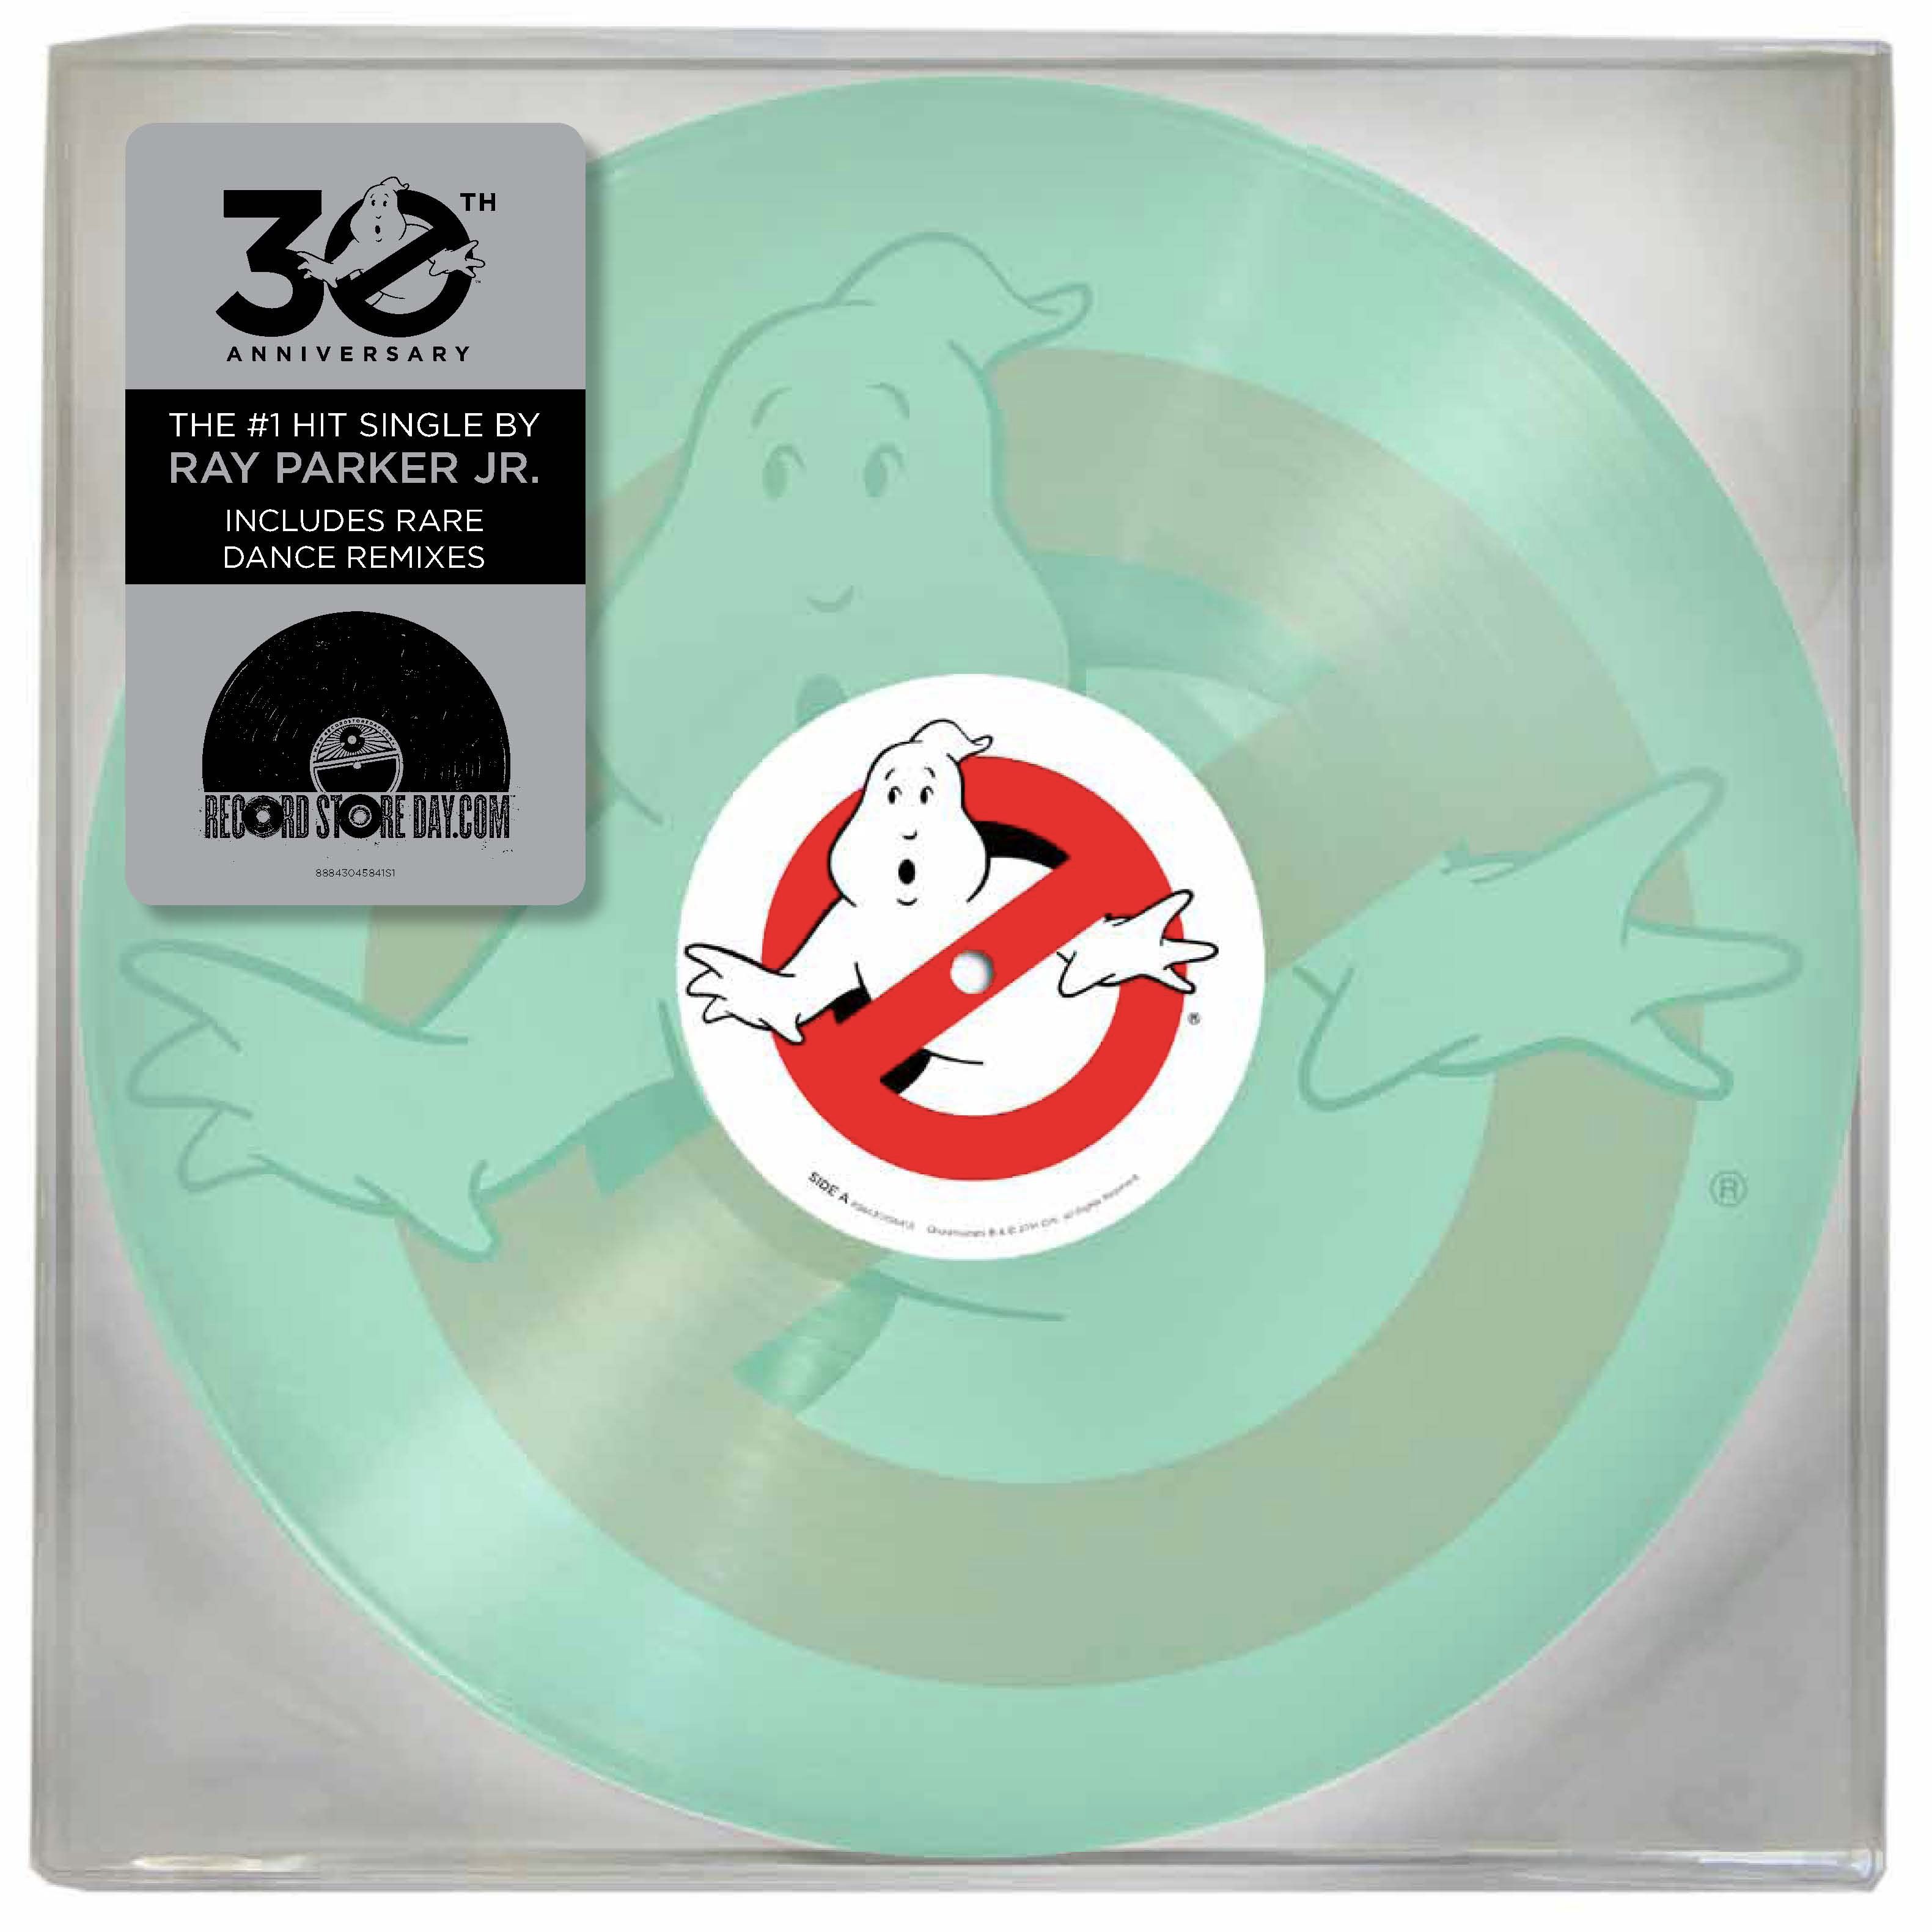 Ghostbusters 30th Anniversary Record Store Day